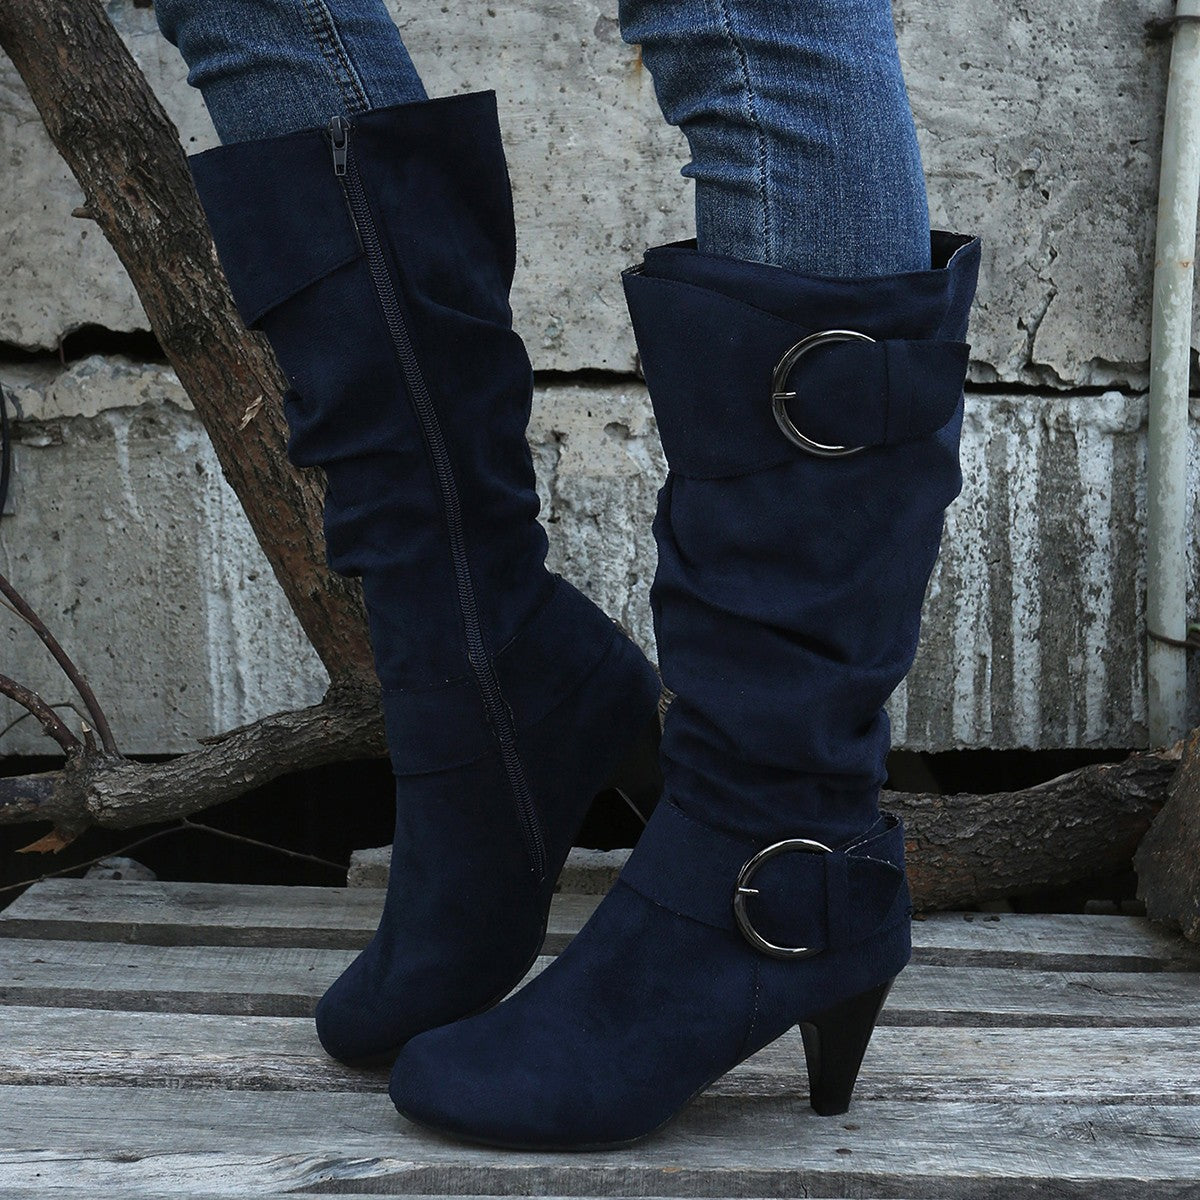 Pointed Toe Buckle Decor Zipper Heeled Boots